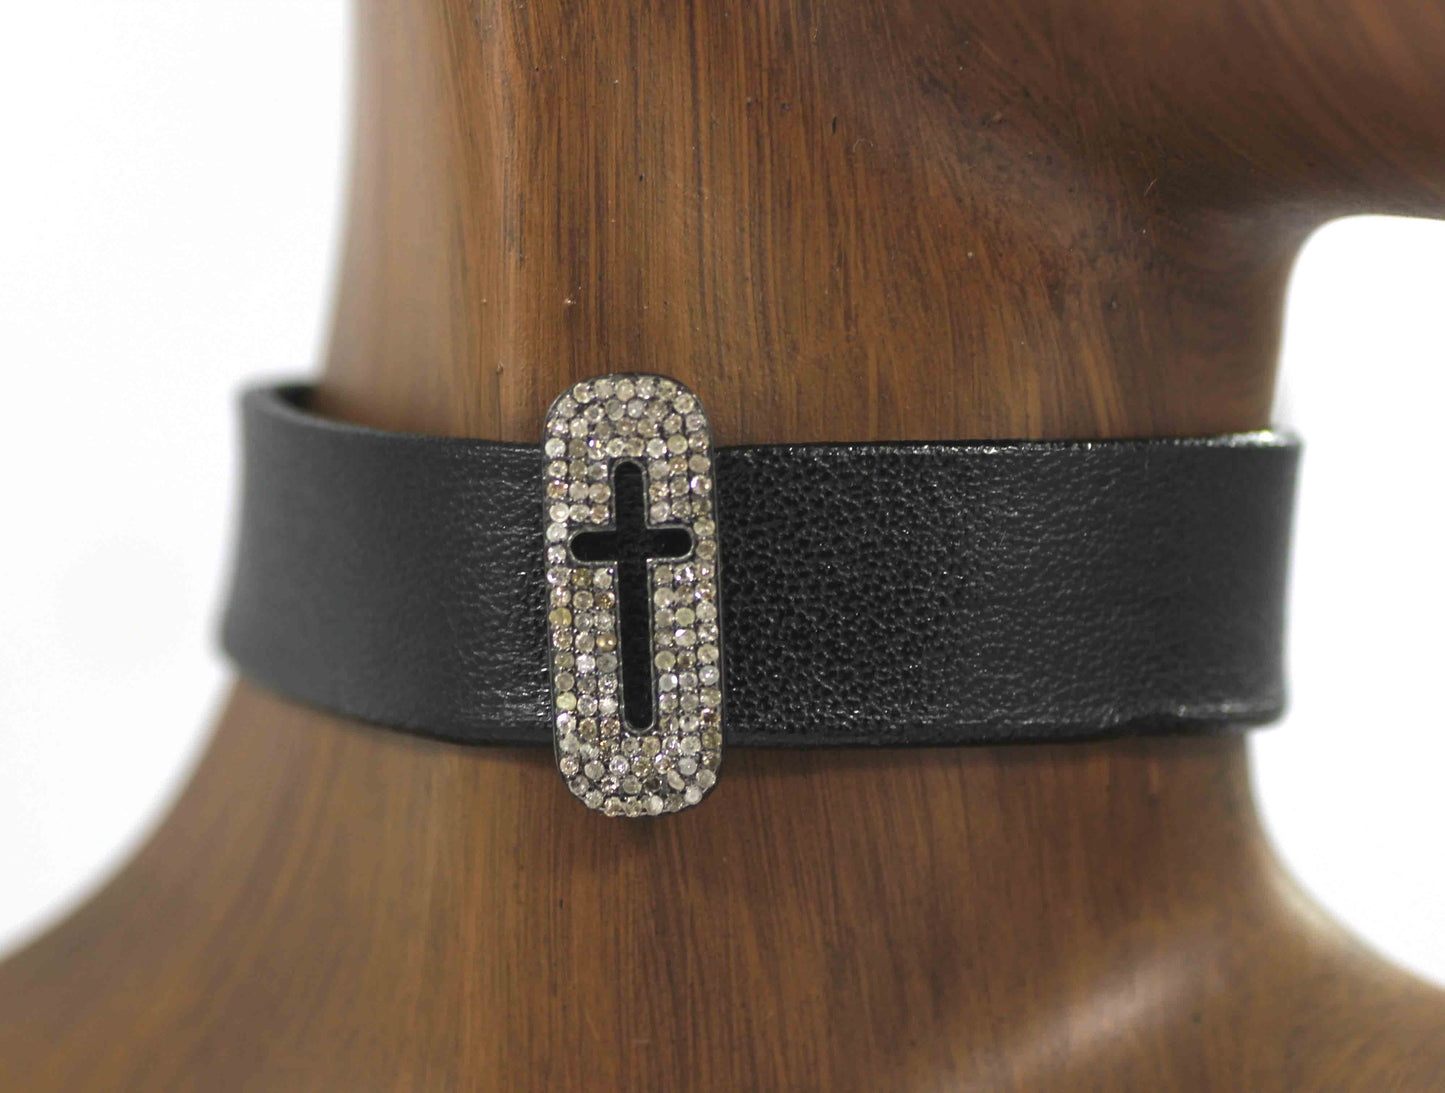 Cross Shape Leather Choker Necklaces With Pave Diamond. 925 Oxidized Sterling Silver Diamond necklaces, Genuine handmade pave diamond necklaces.